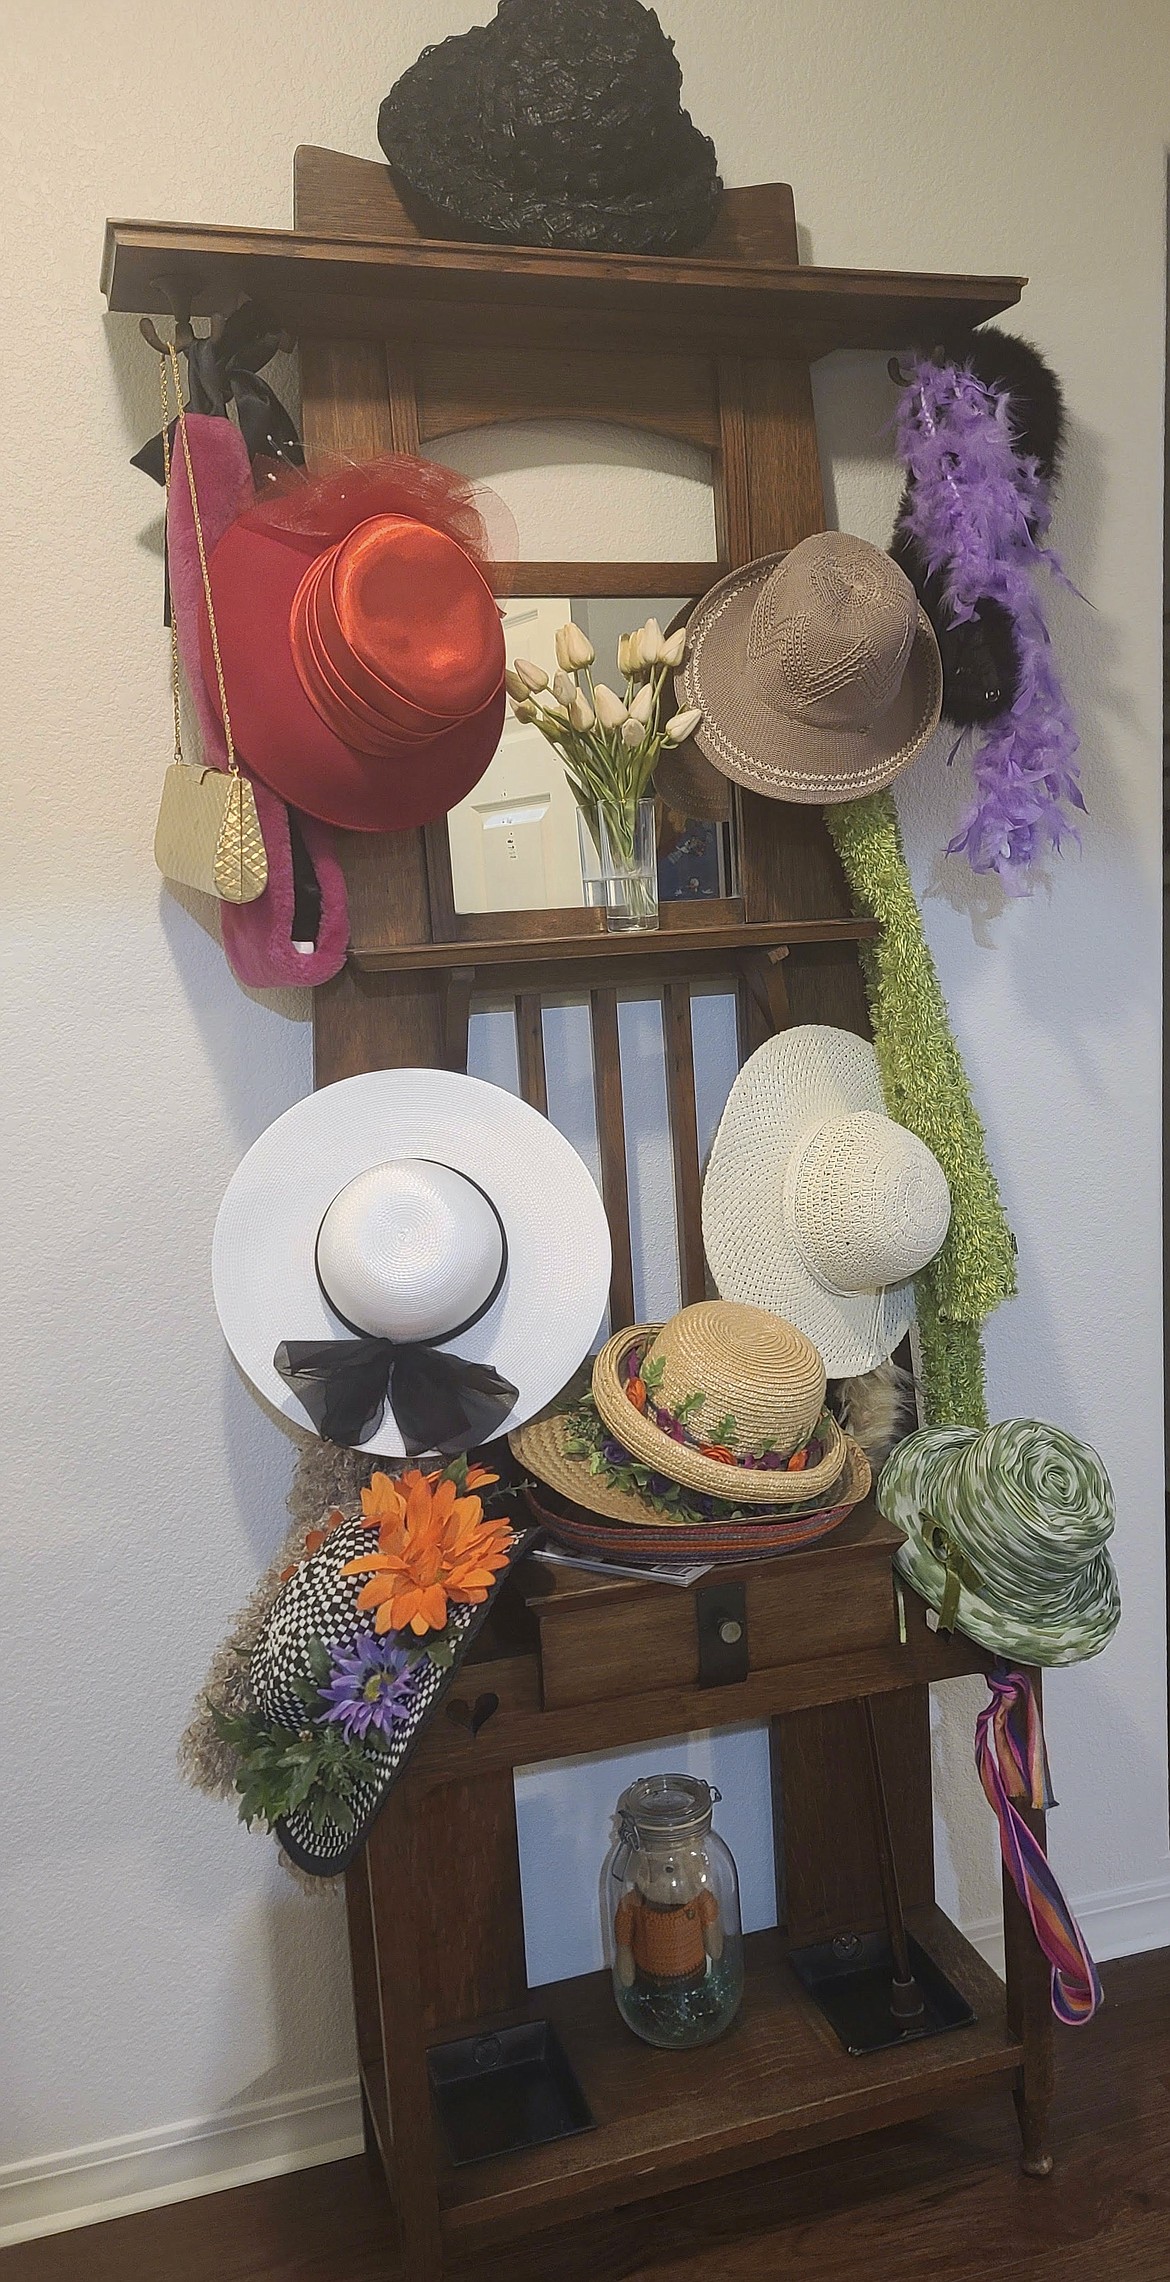 English umbrella stand right outside the Hill House English Tea Room with many of Vivienne' Montague's hats she loaned for the Oct. 29 tea party. (photo provided)